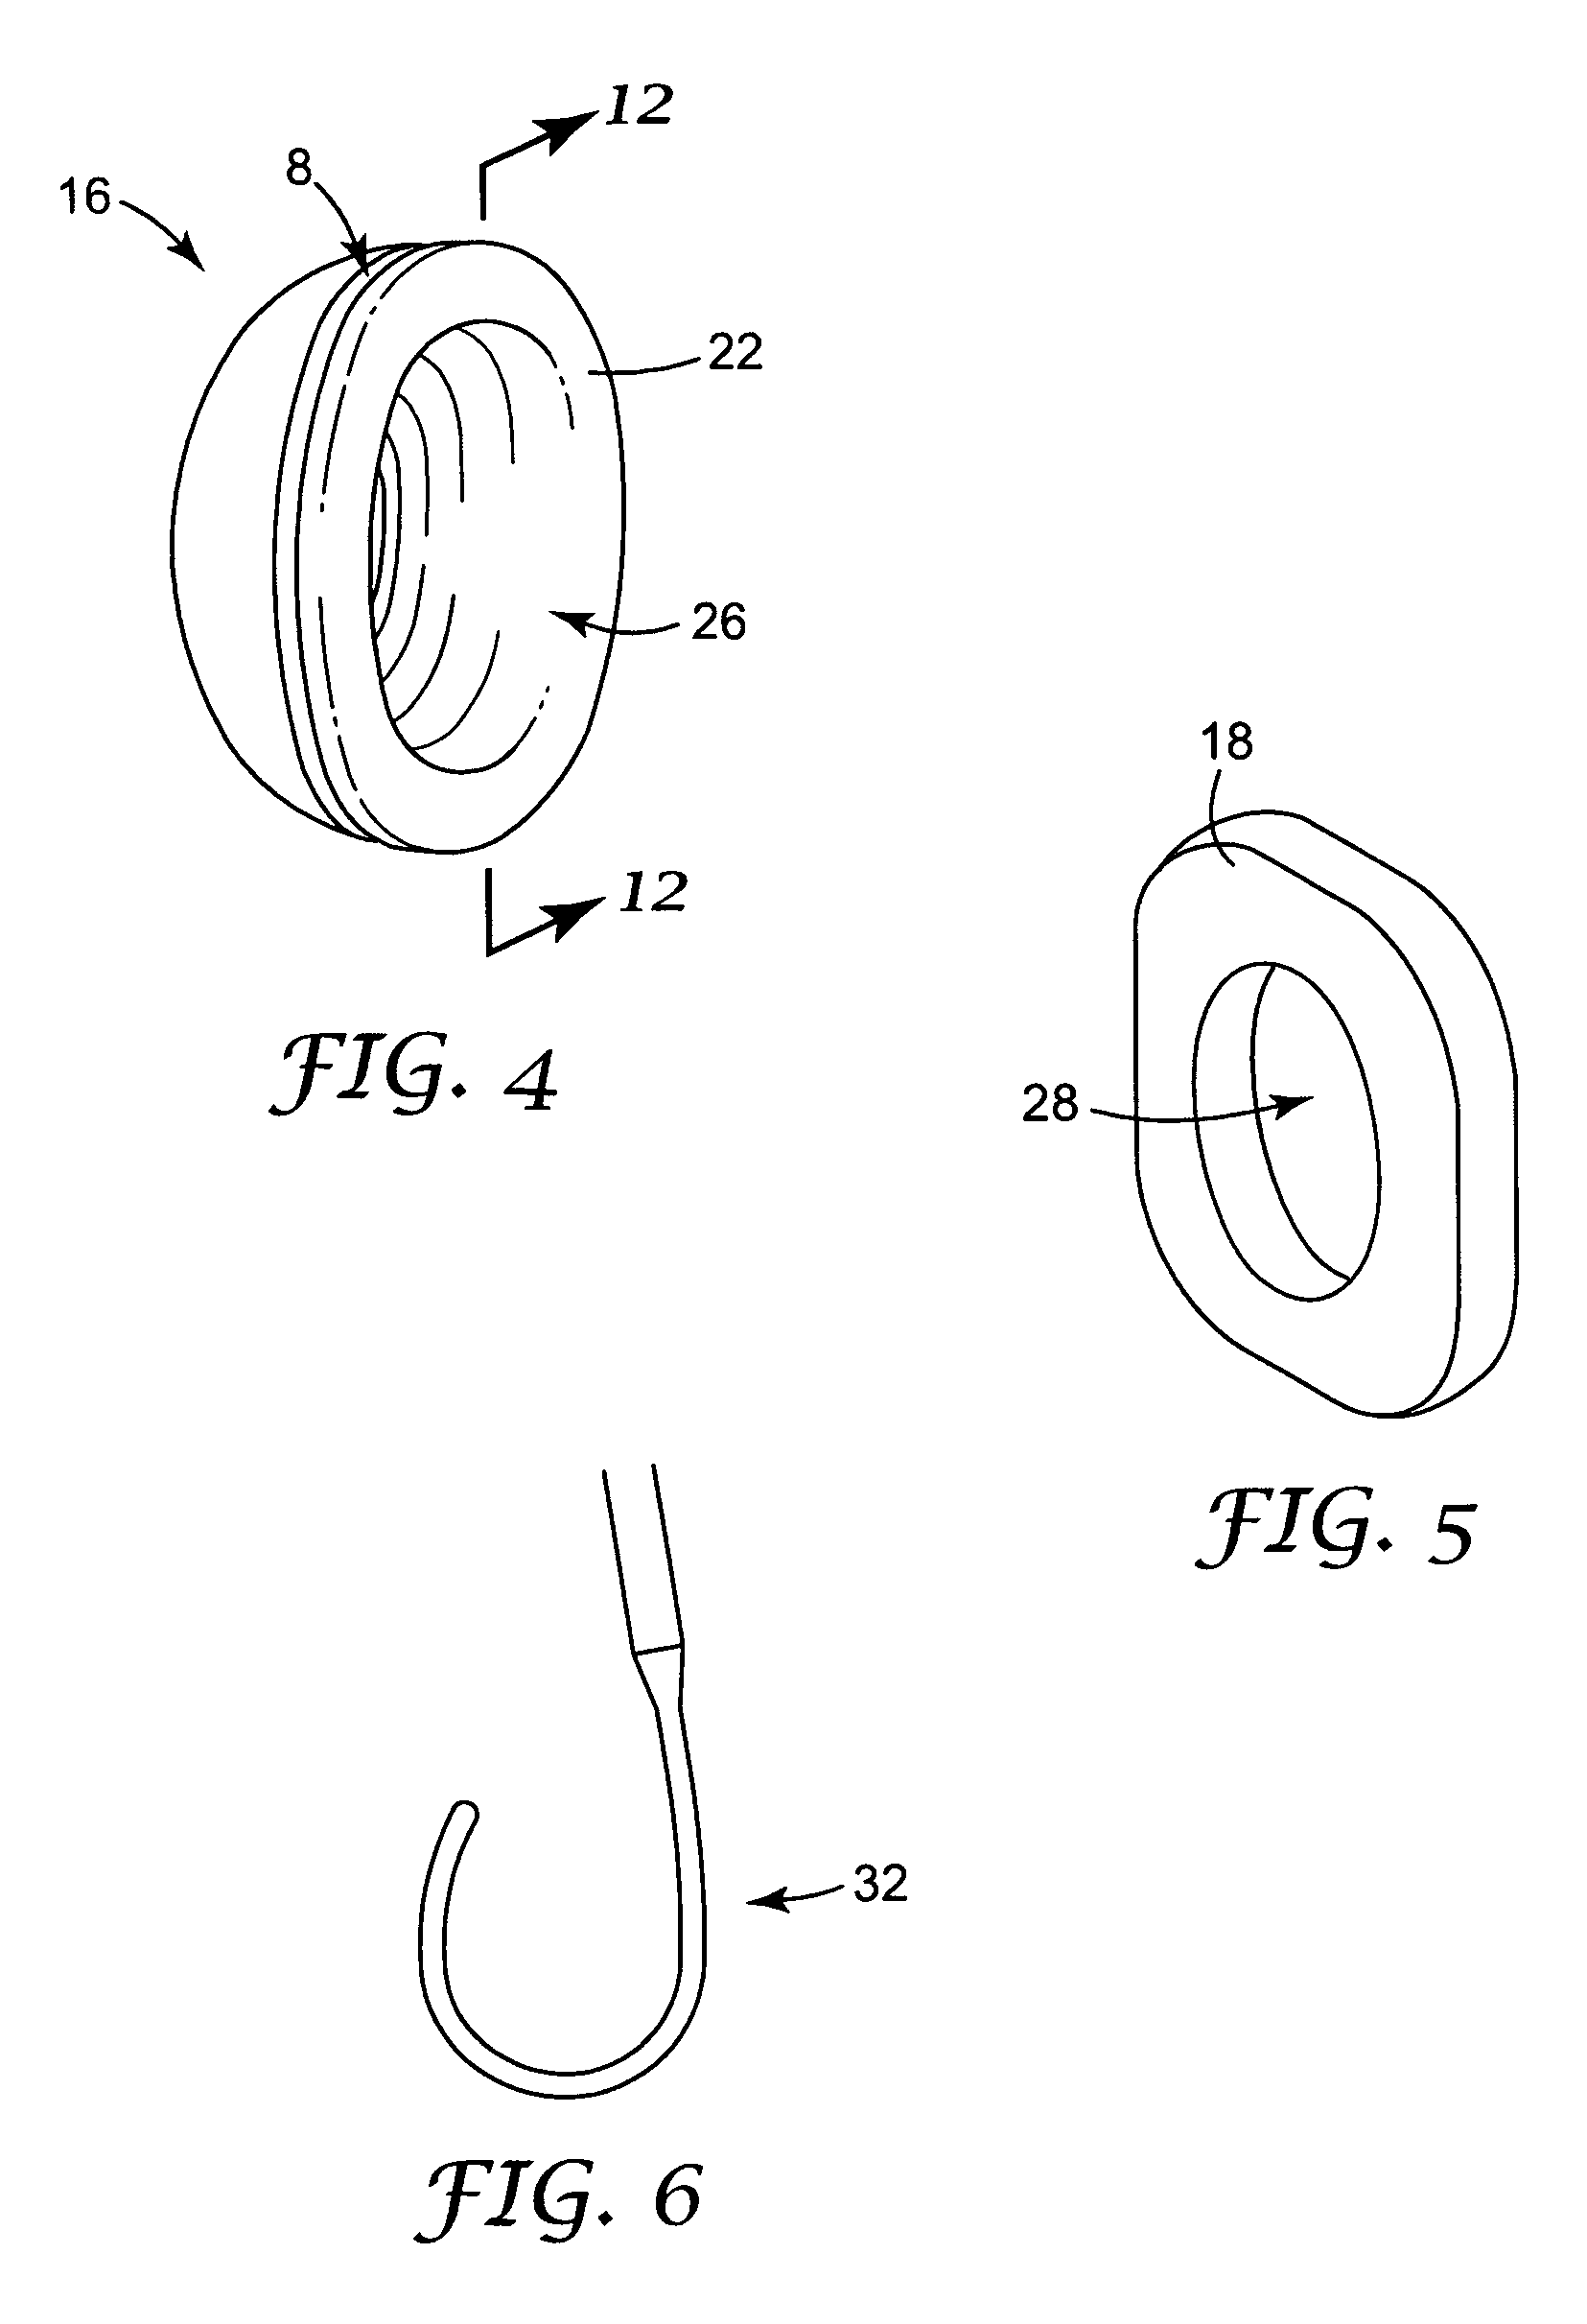 Hearing protective device that includes cellular earmuffs